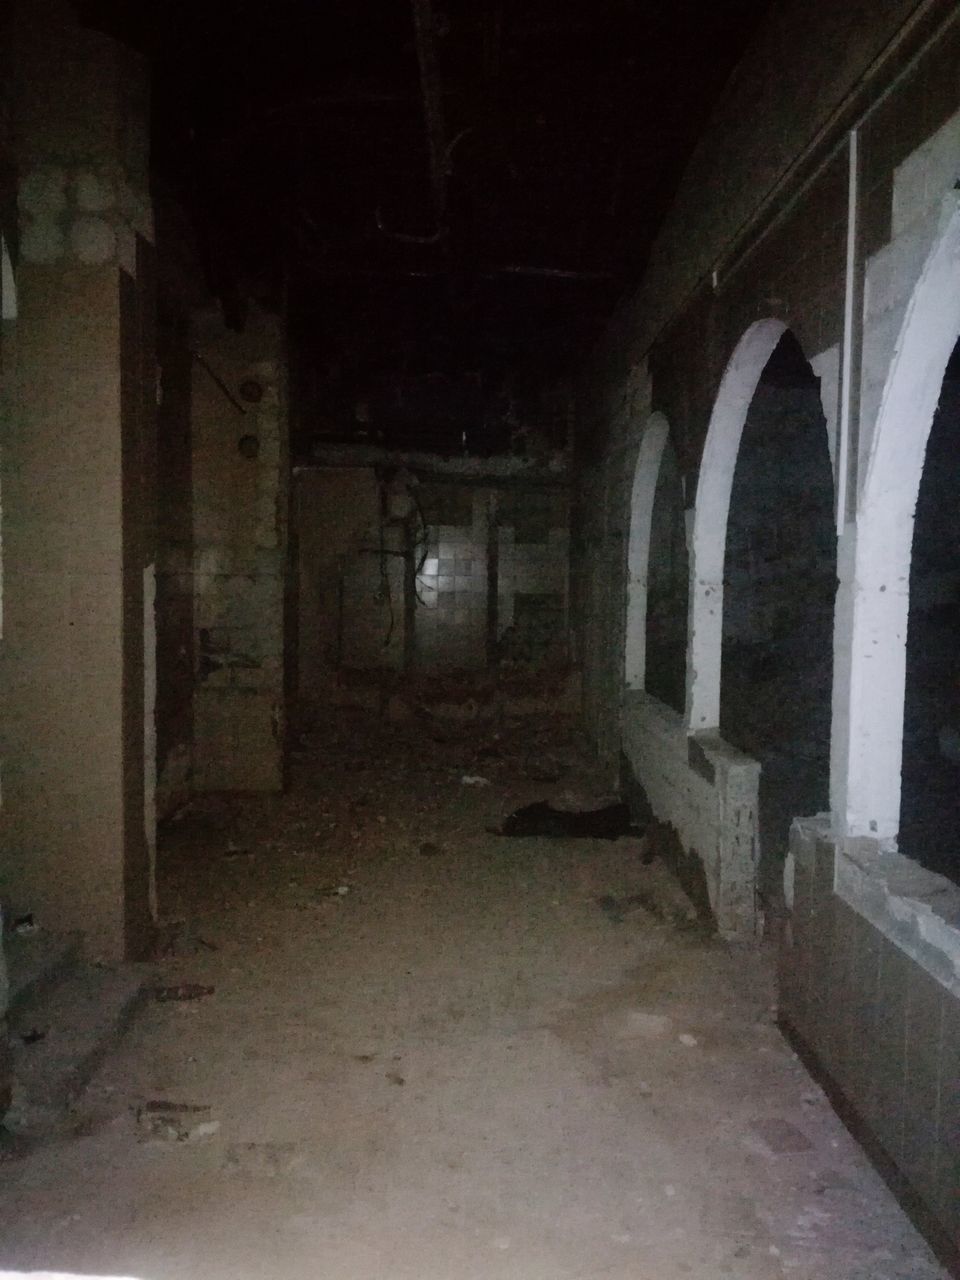 INTERIOR OF ABANDONED BUILDING